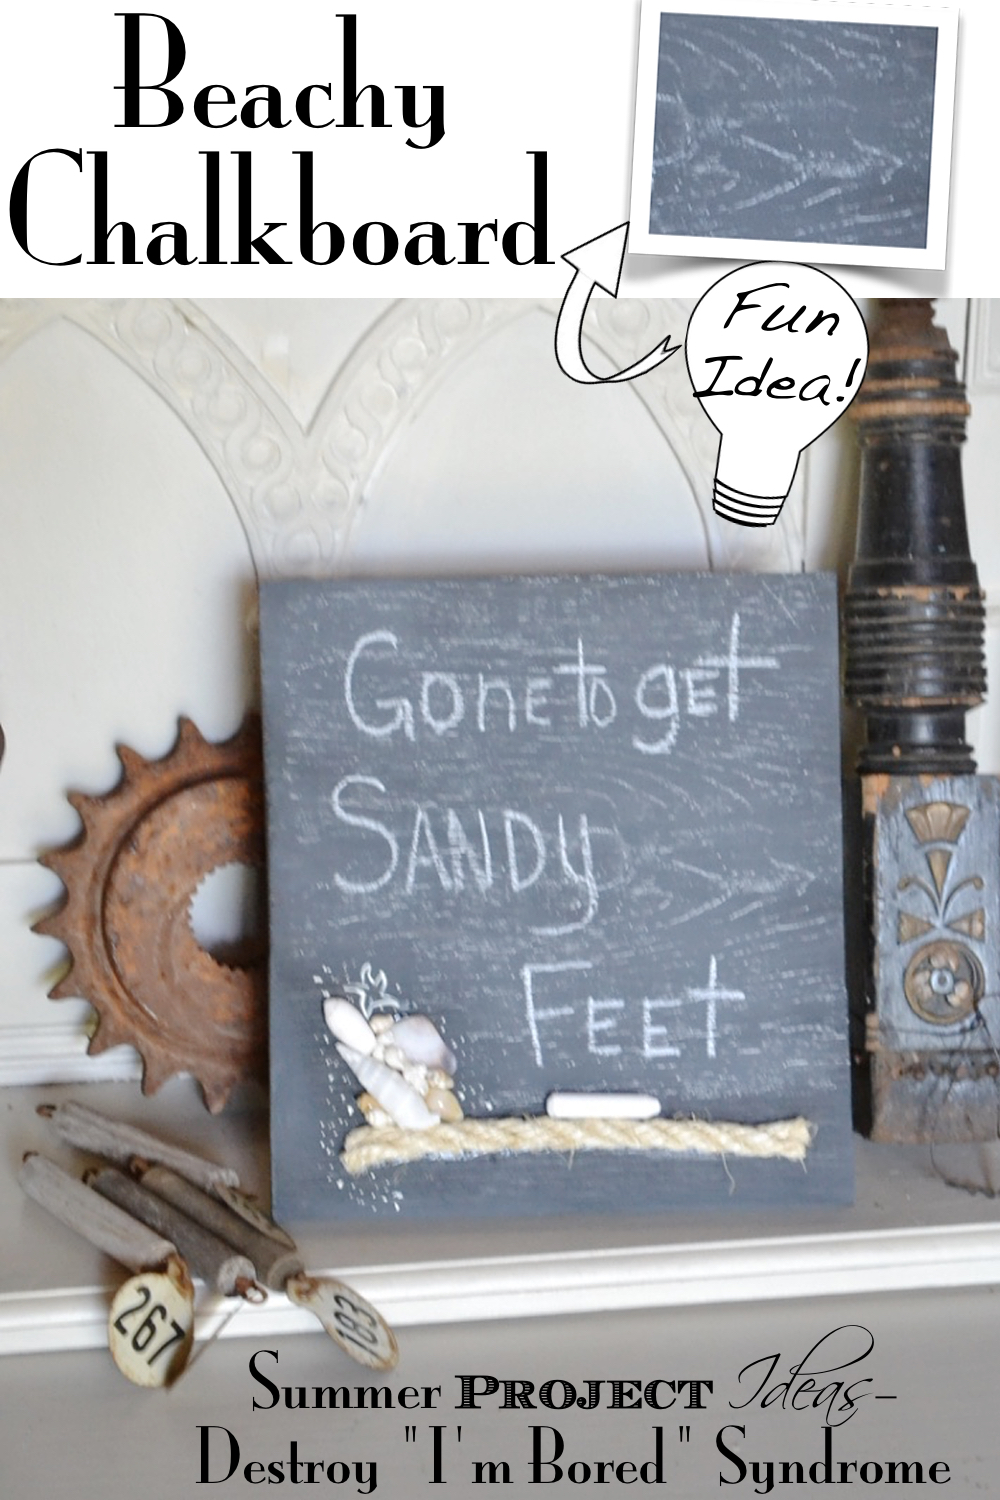 Simple beach chalkboard easy for the kids with a little supervision. Summer project Ideas - Destroy "I'M Bored" Syndrome. Country Design Style